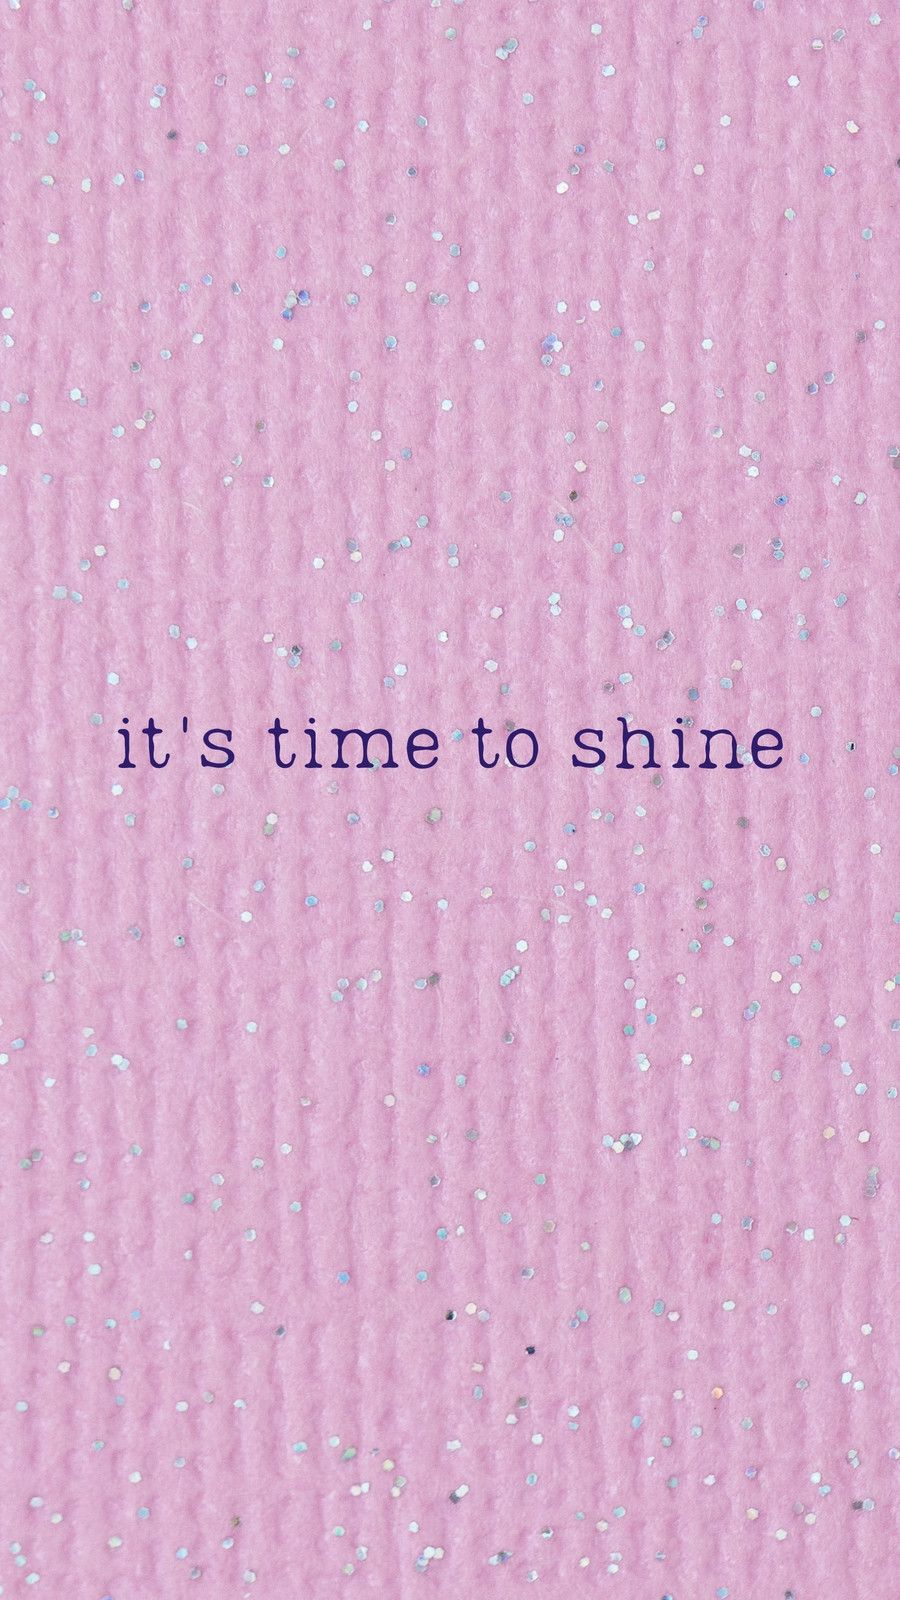 It's time to shine aesthetic wallpaper